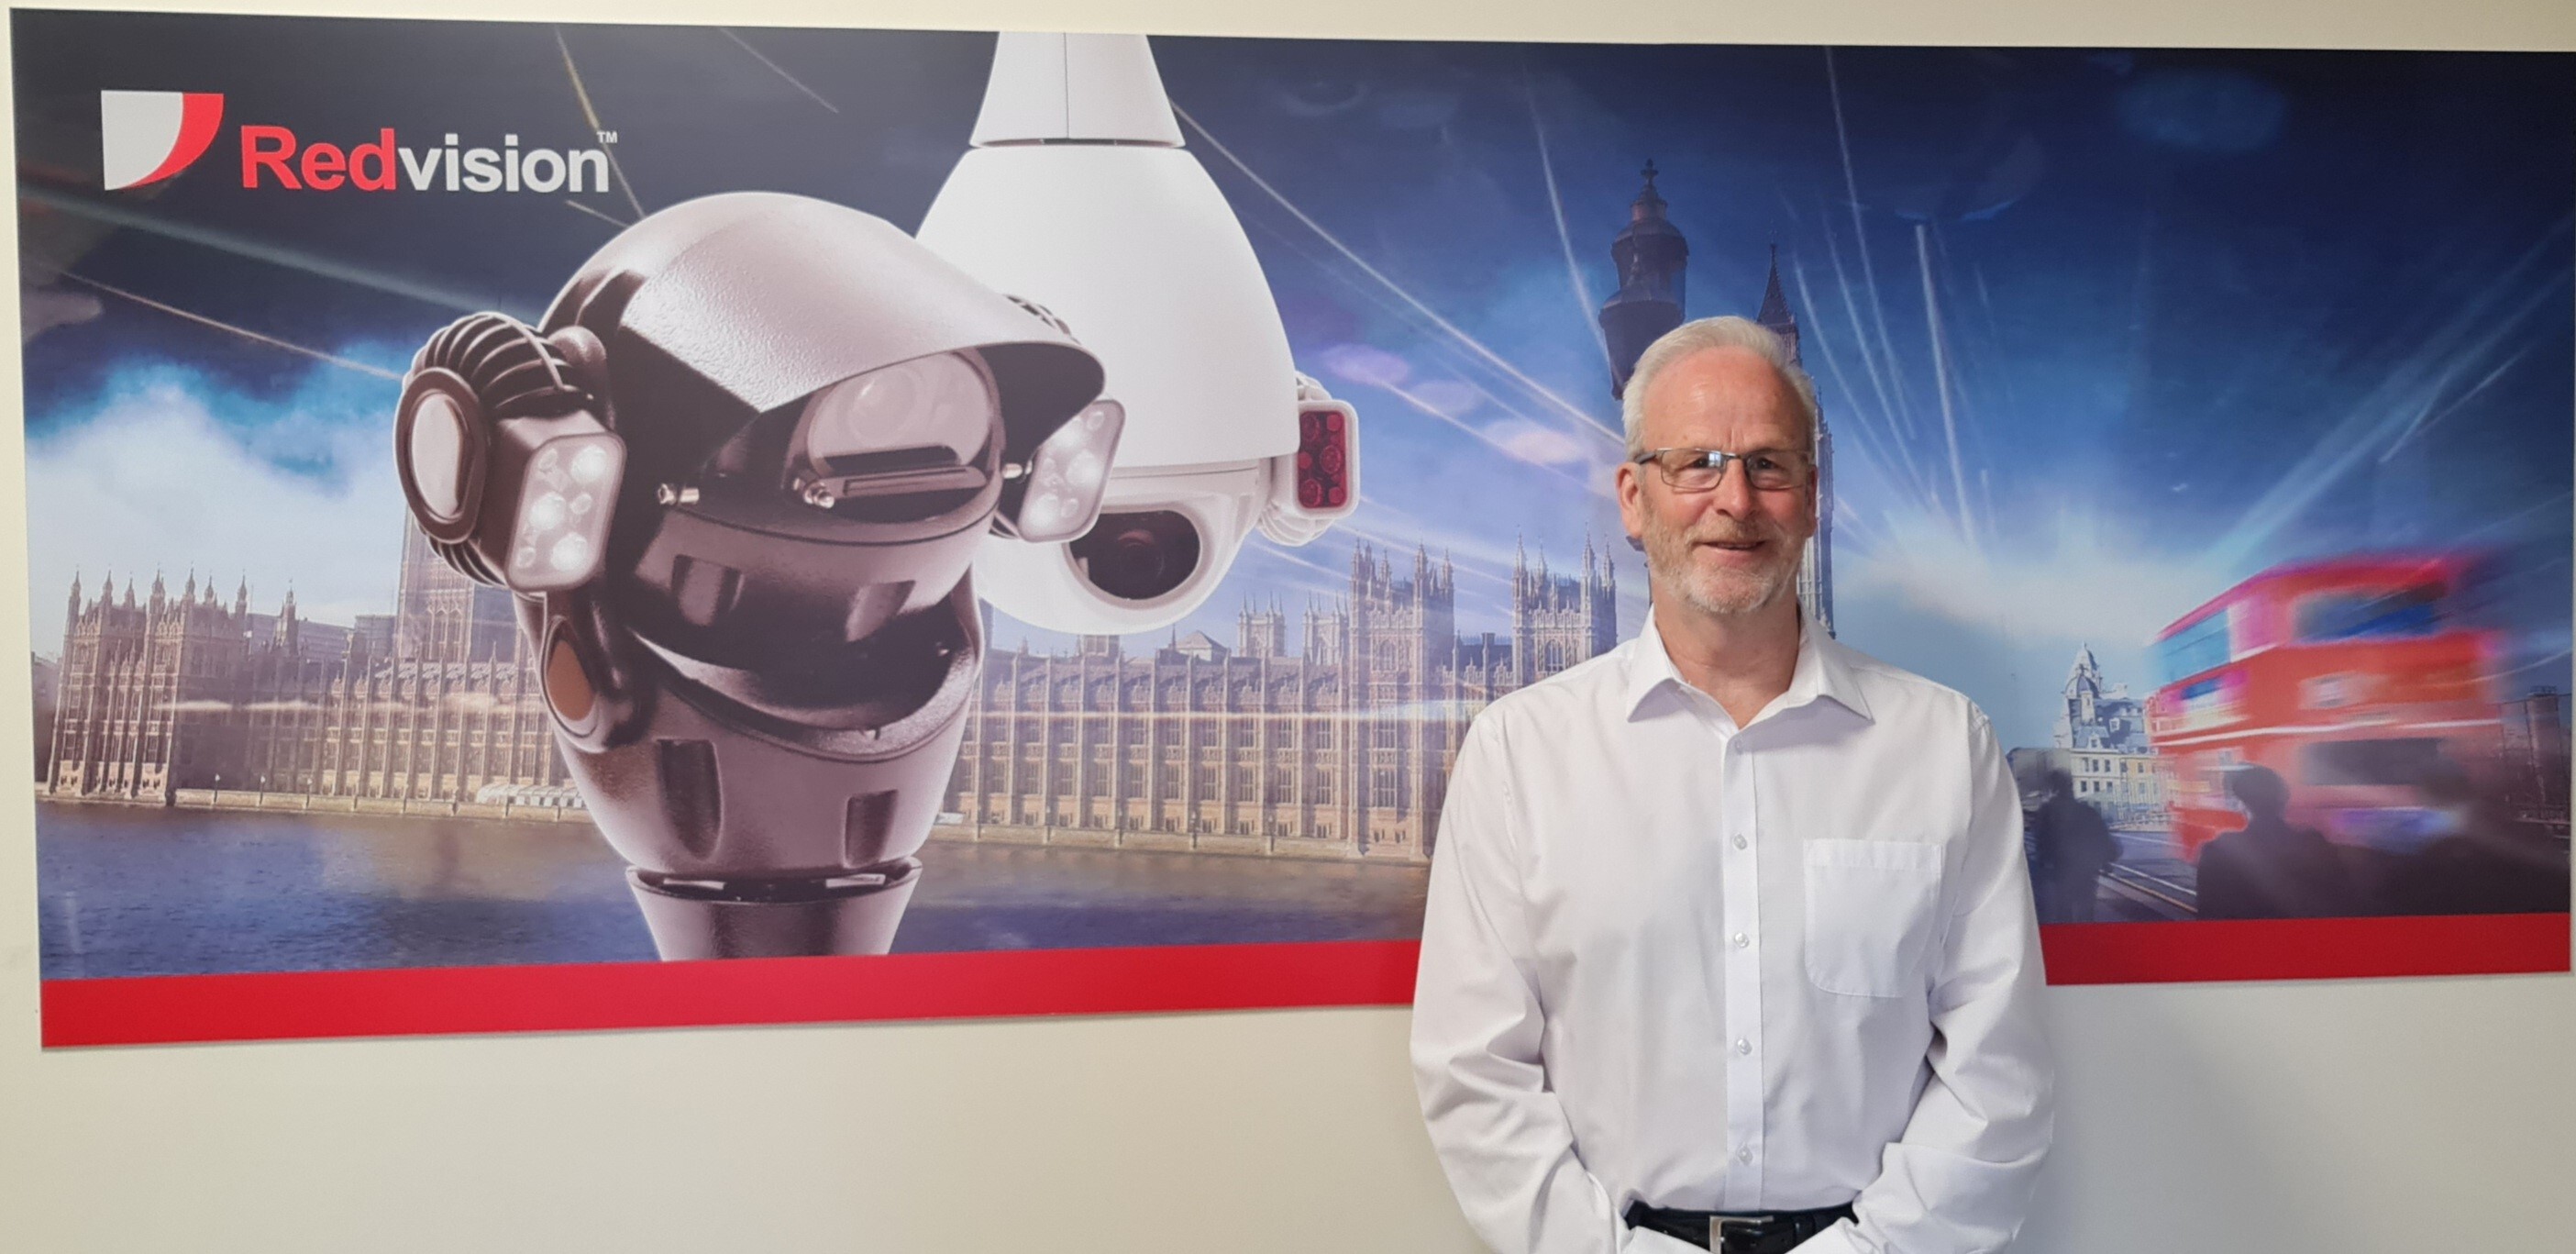 Redvision welcomes Tim Cocks as the new Redcop Divisional Manager of our manufacturing site in Hampshire.